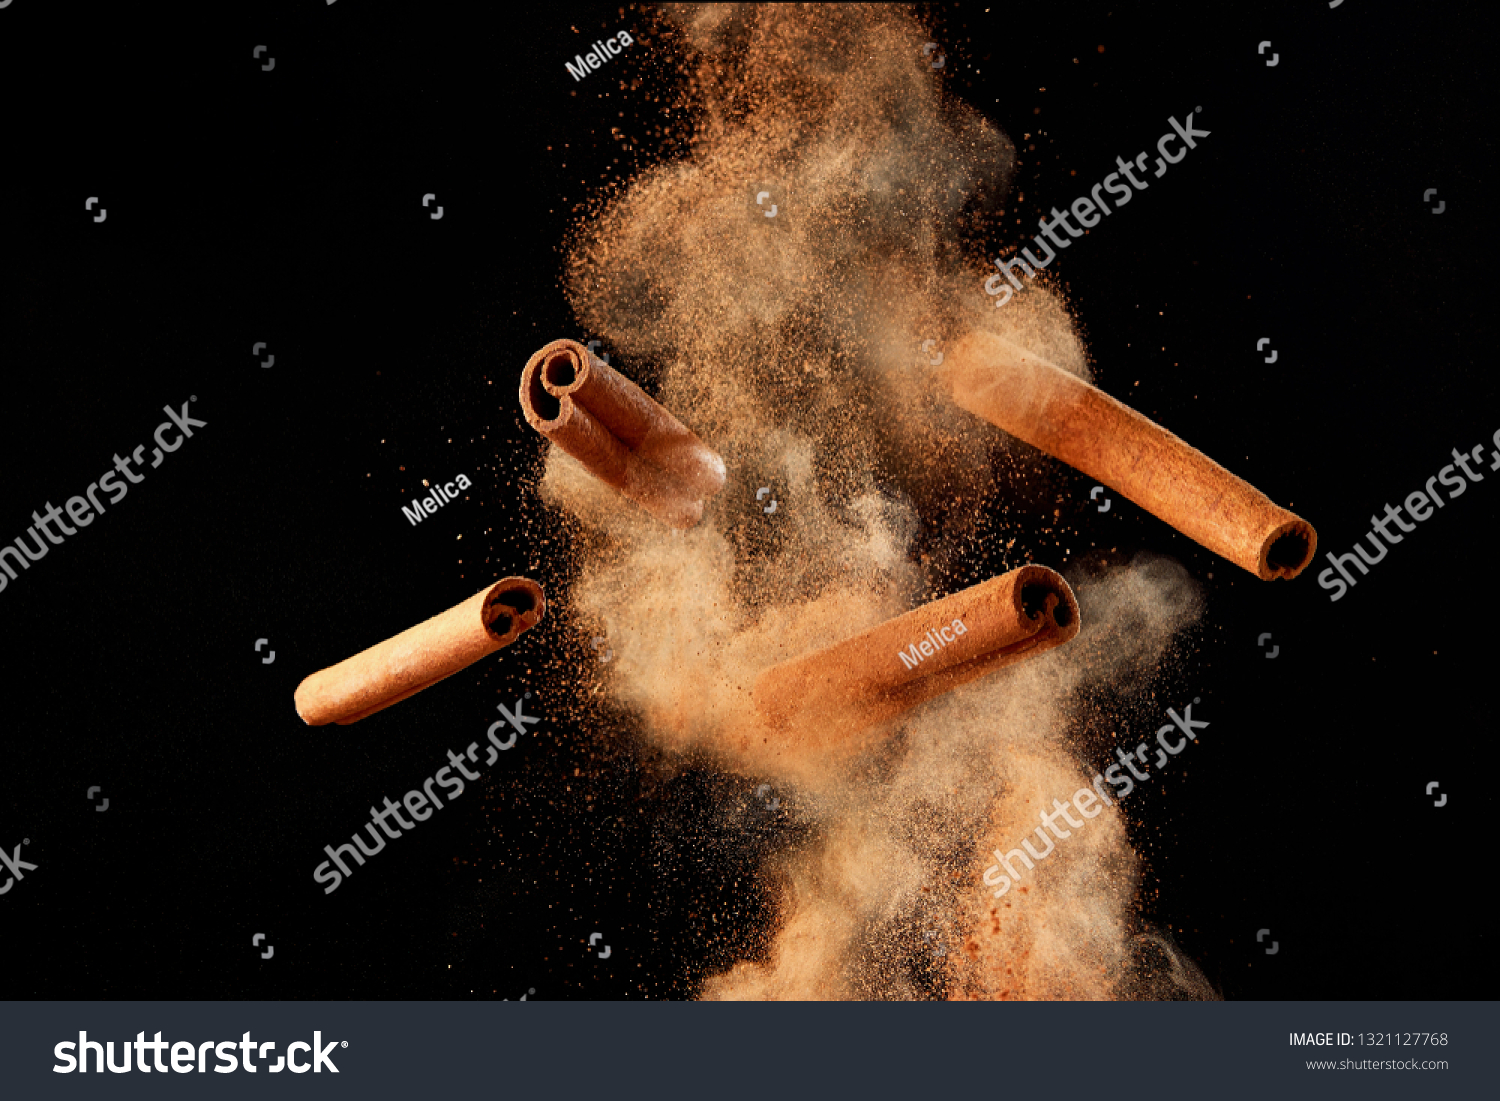 Food explosion with cinnamon sticks and powder, on black background. #1321127768